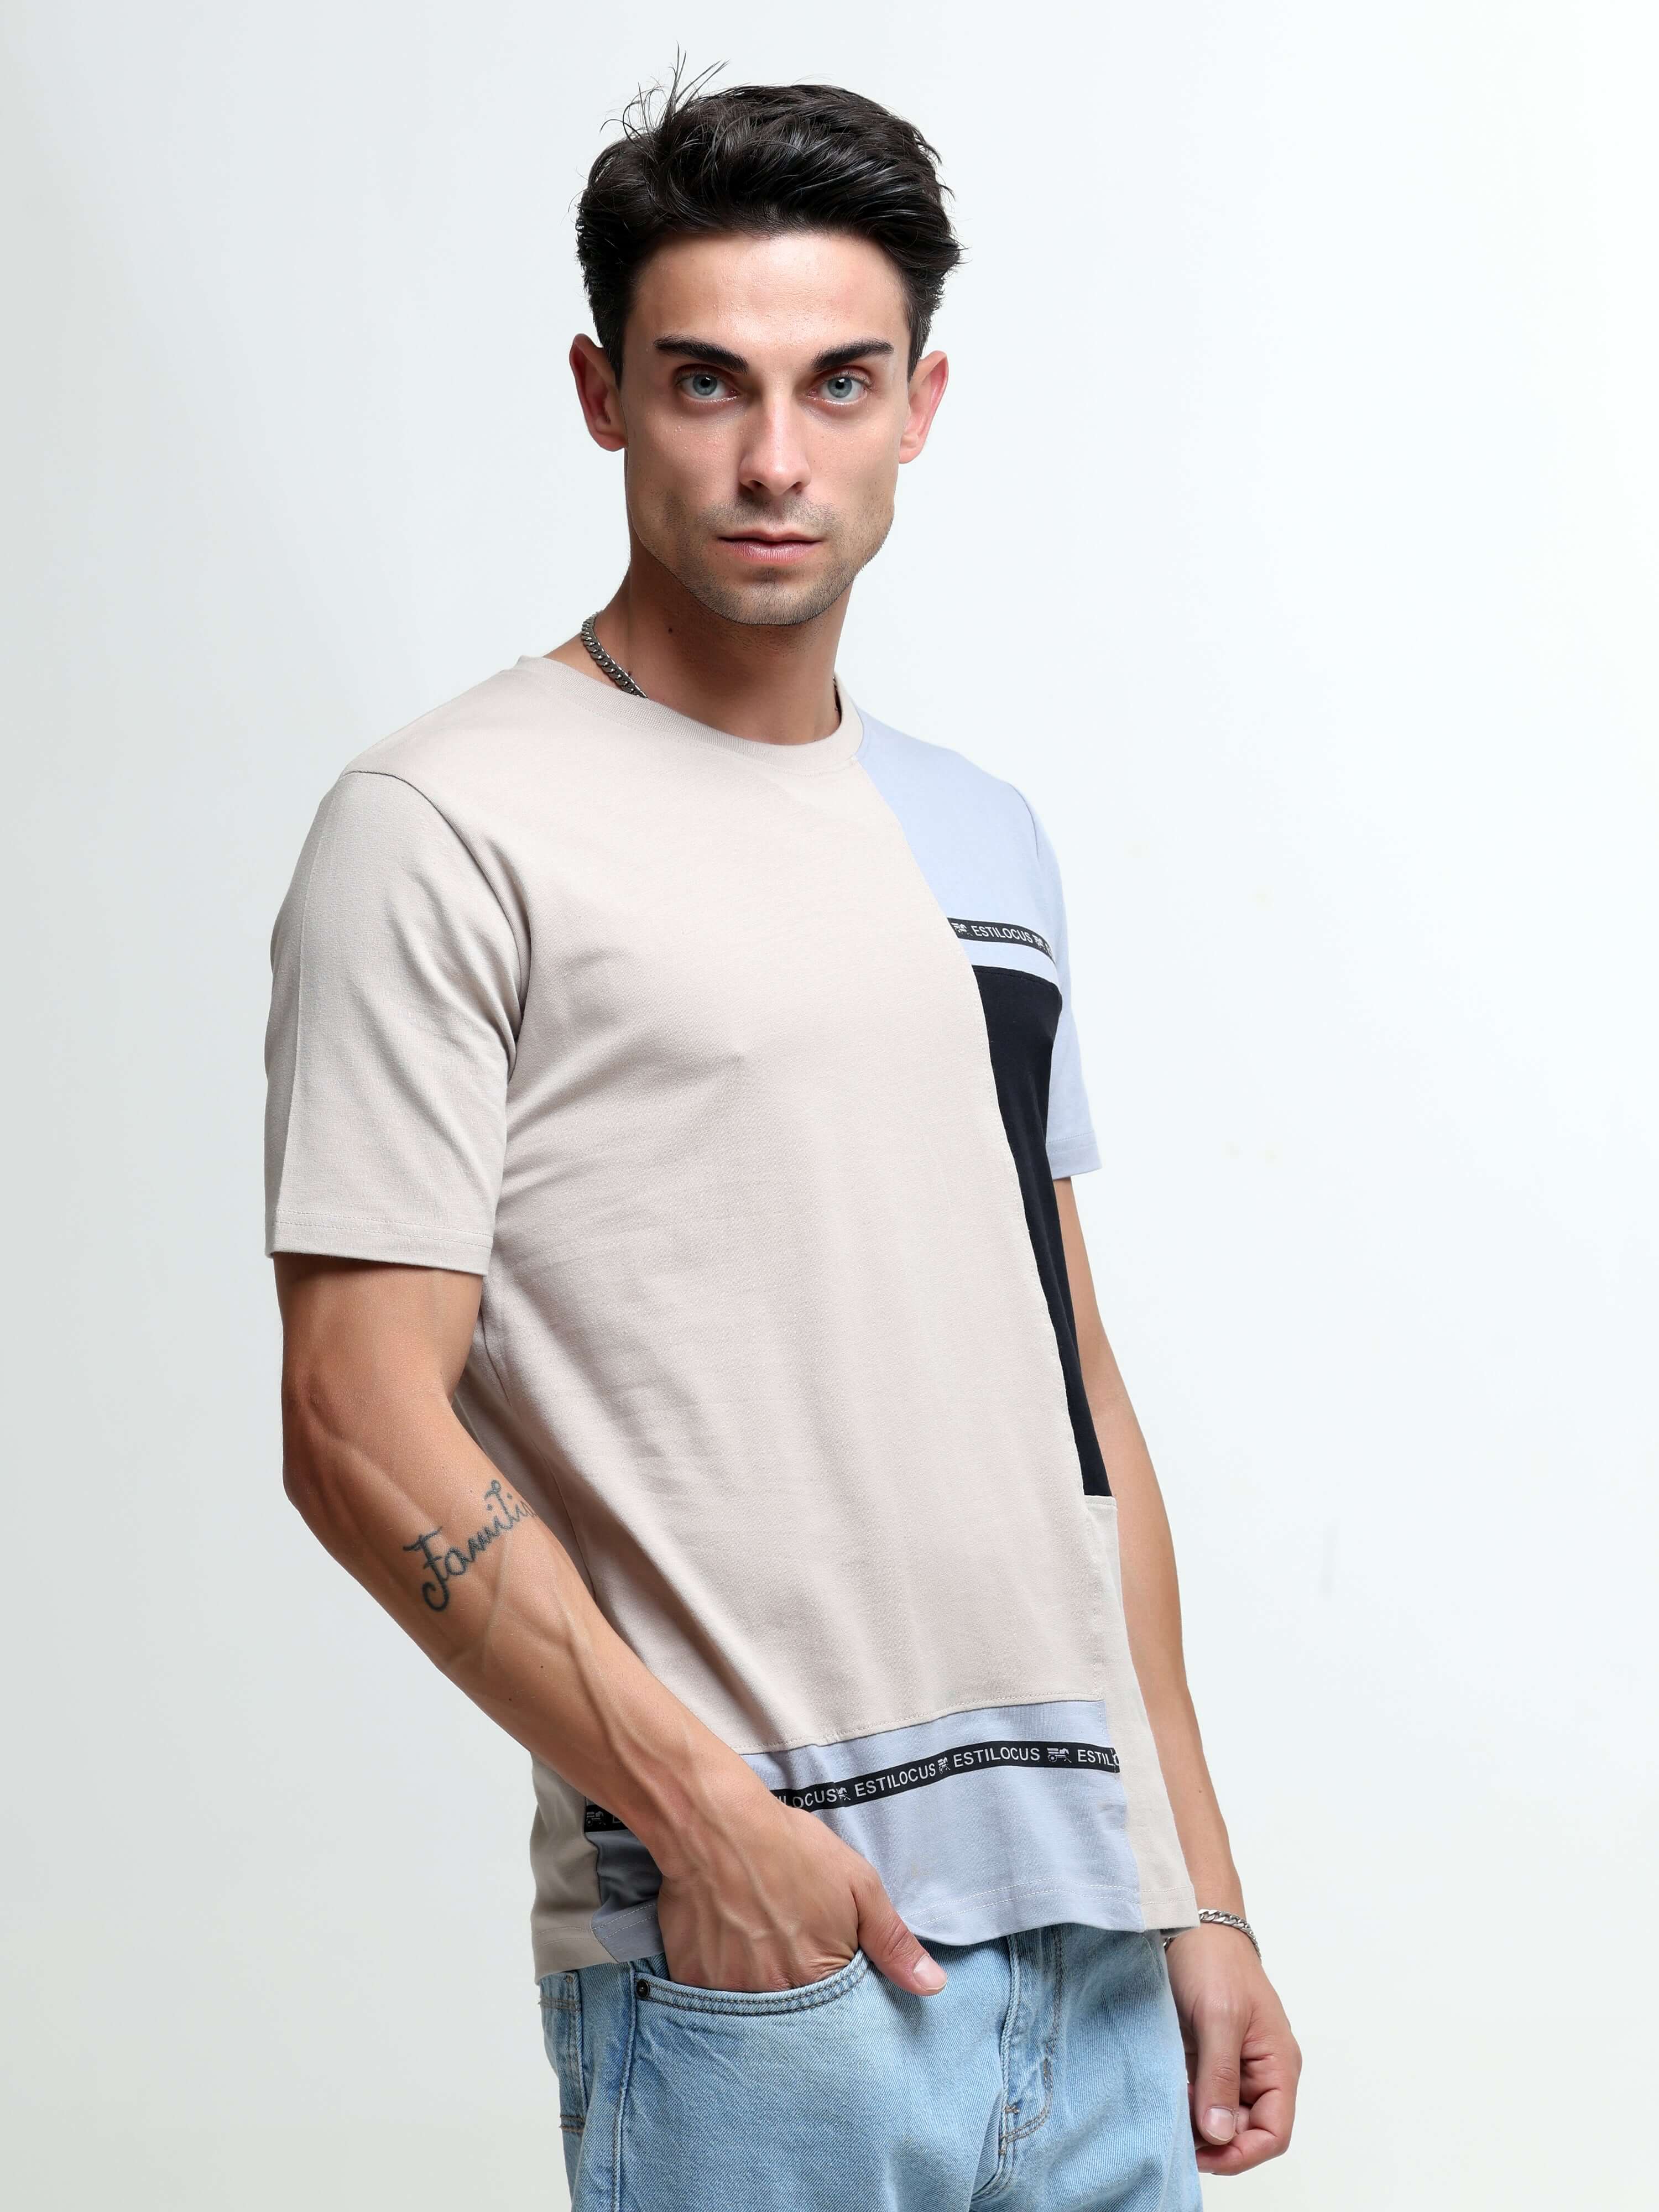 Thrive sand beige light weight tshirt shop online at Estilocus. This relax-fit Cut and Sew T-shirt is comfortable and the perfect essential all year round. Pair it with white jeans and sneakers and layer it up with a denim jacket for a casual and put-toge